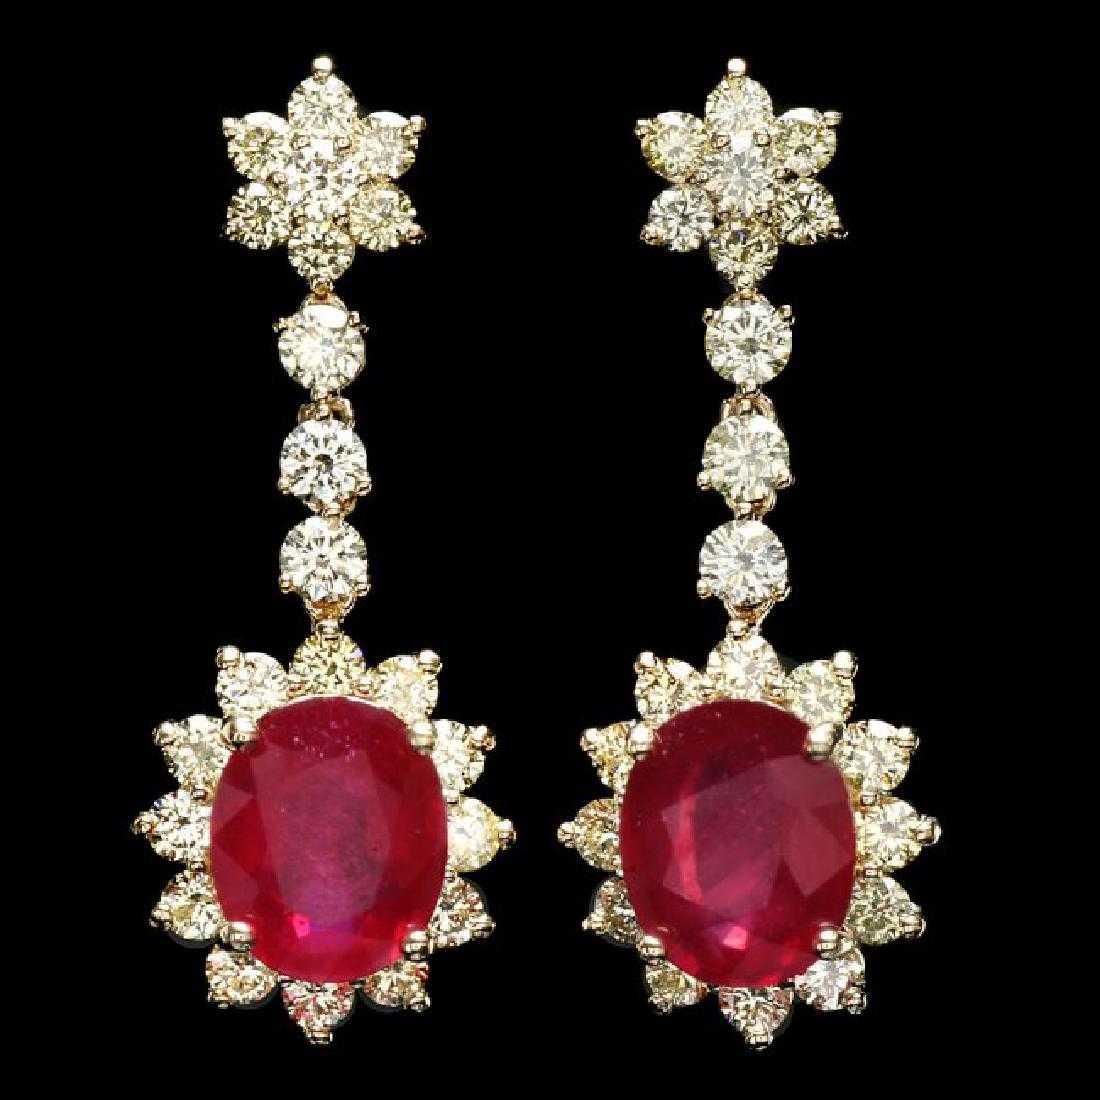 14K Yellow Gold 9.36ct Ruby and 3.82ct Diamond Earrings